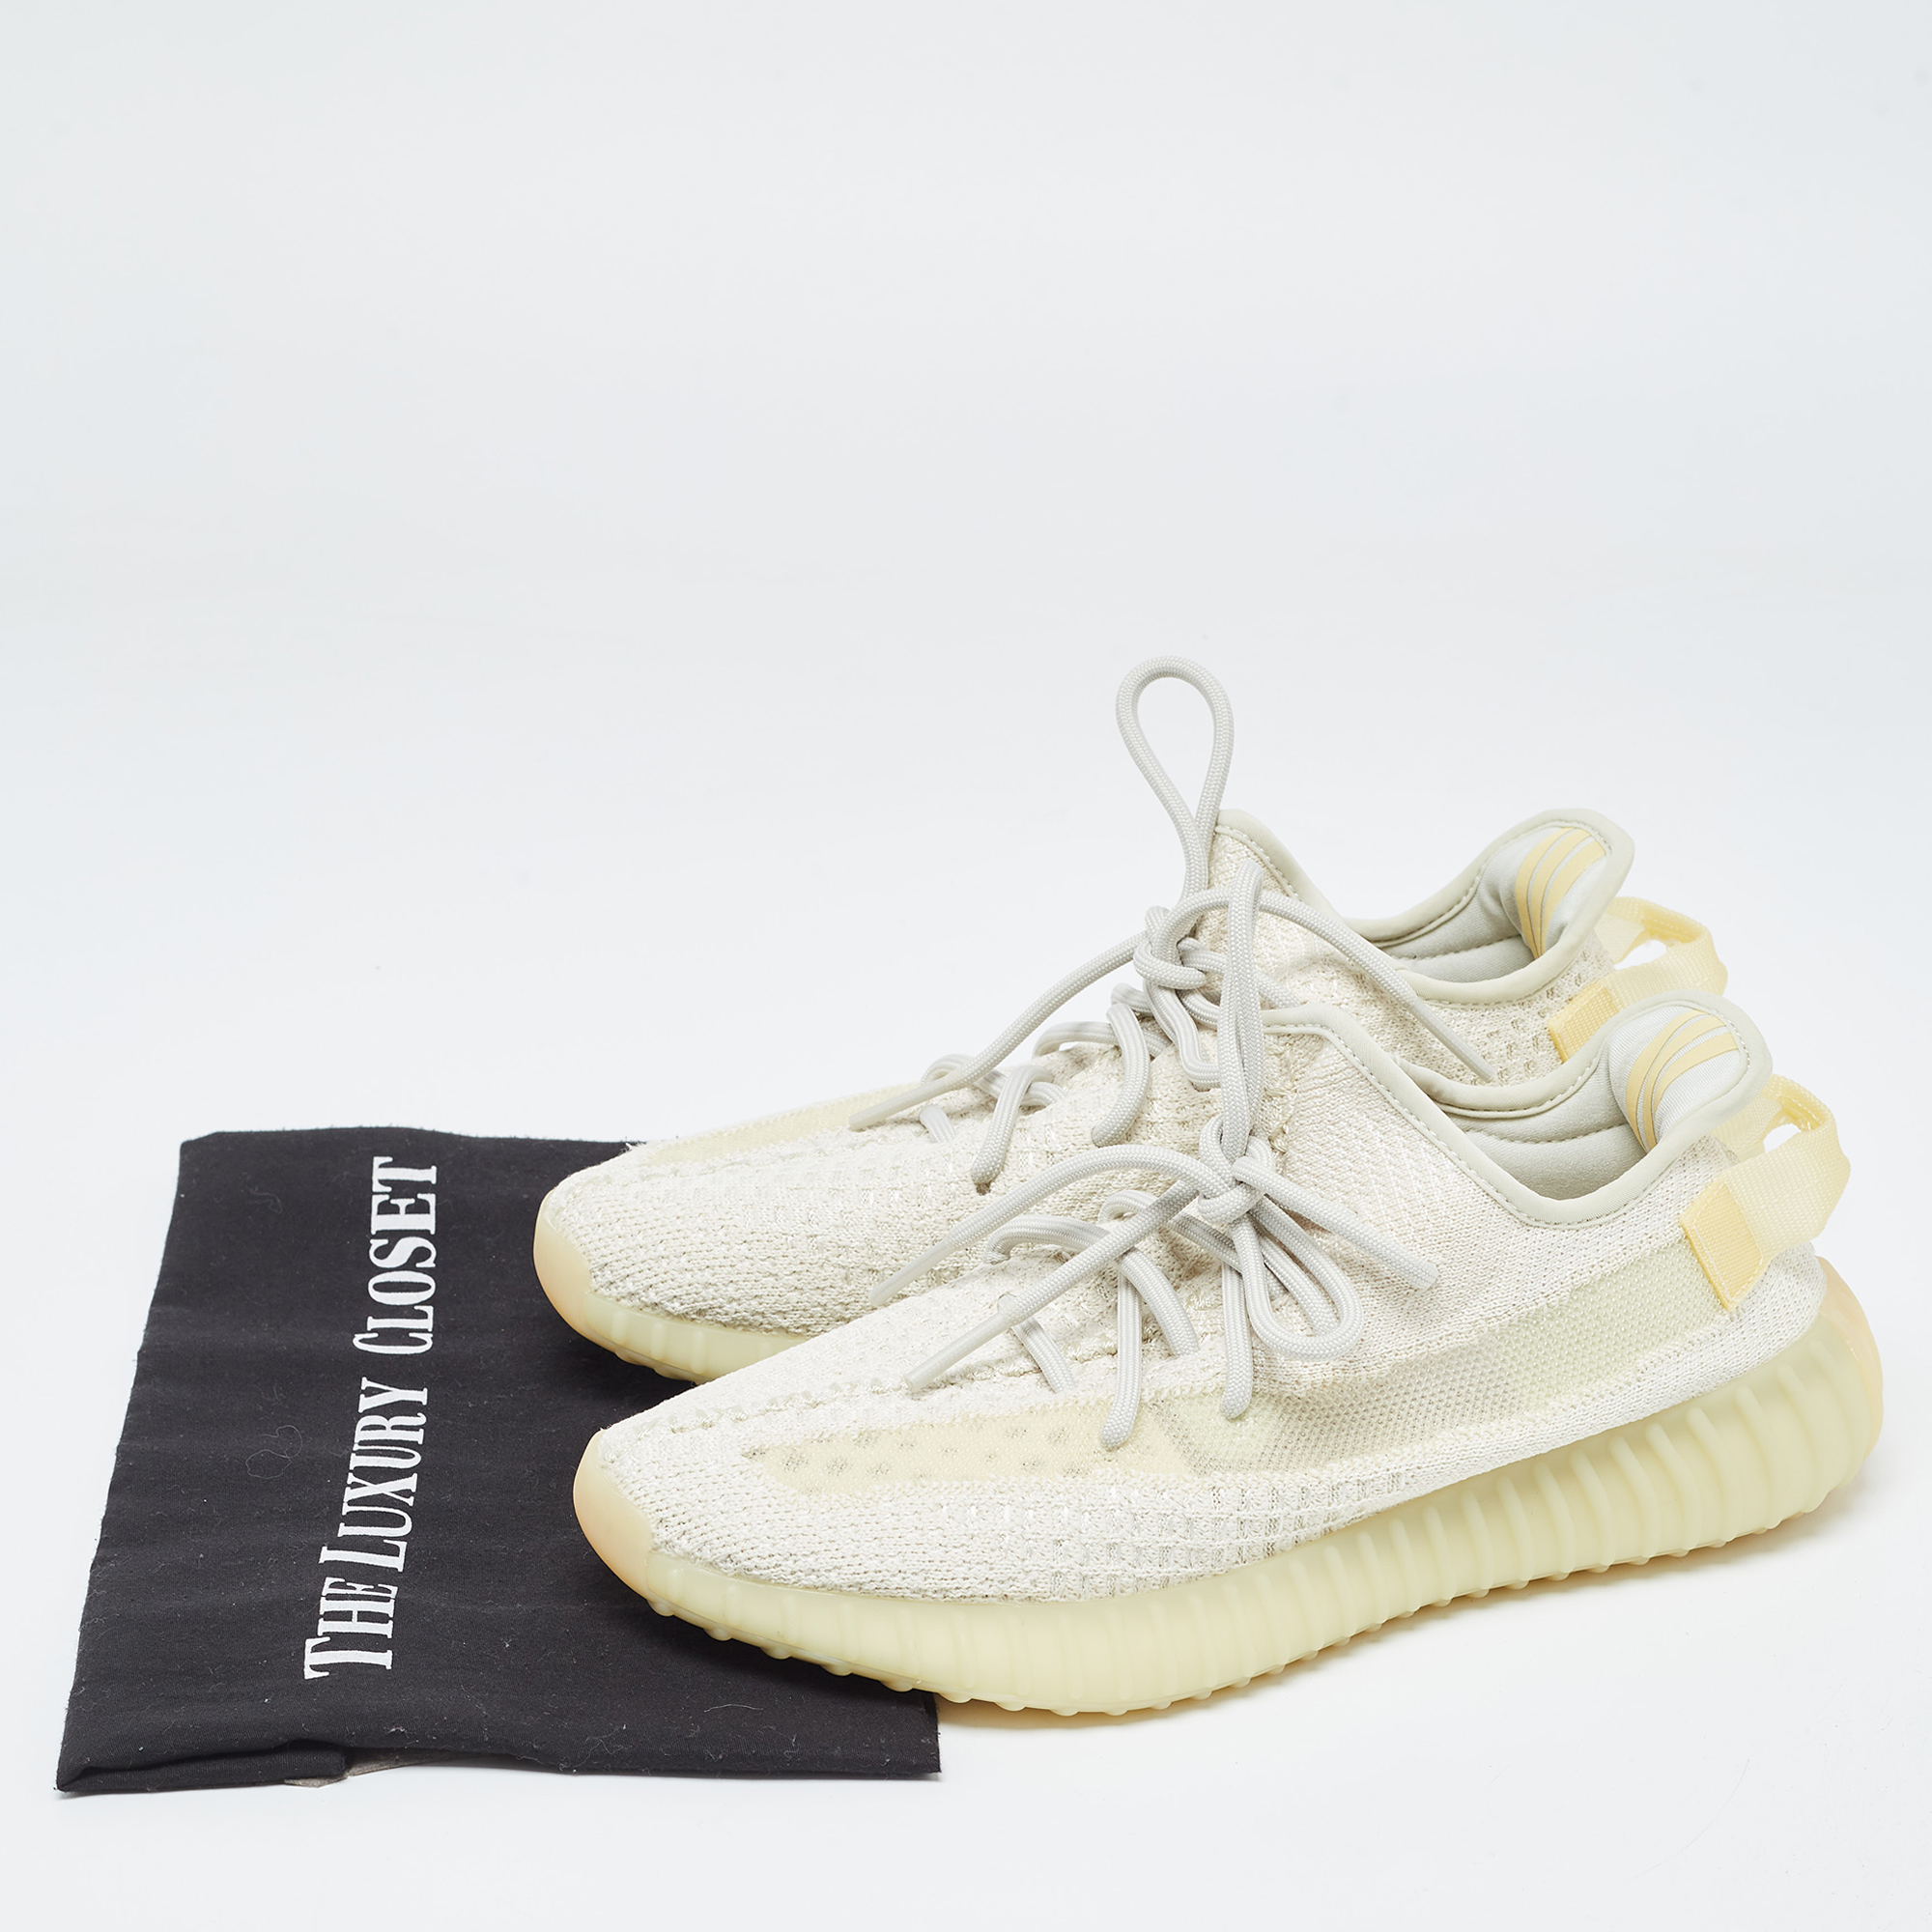 Yeezy X Adidas Cream Cotton Knit Fabric Boost 350 V2 Triple White Sneakers Size 42